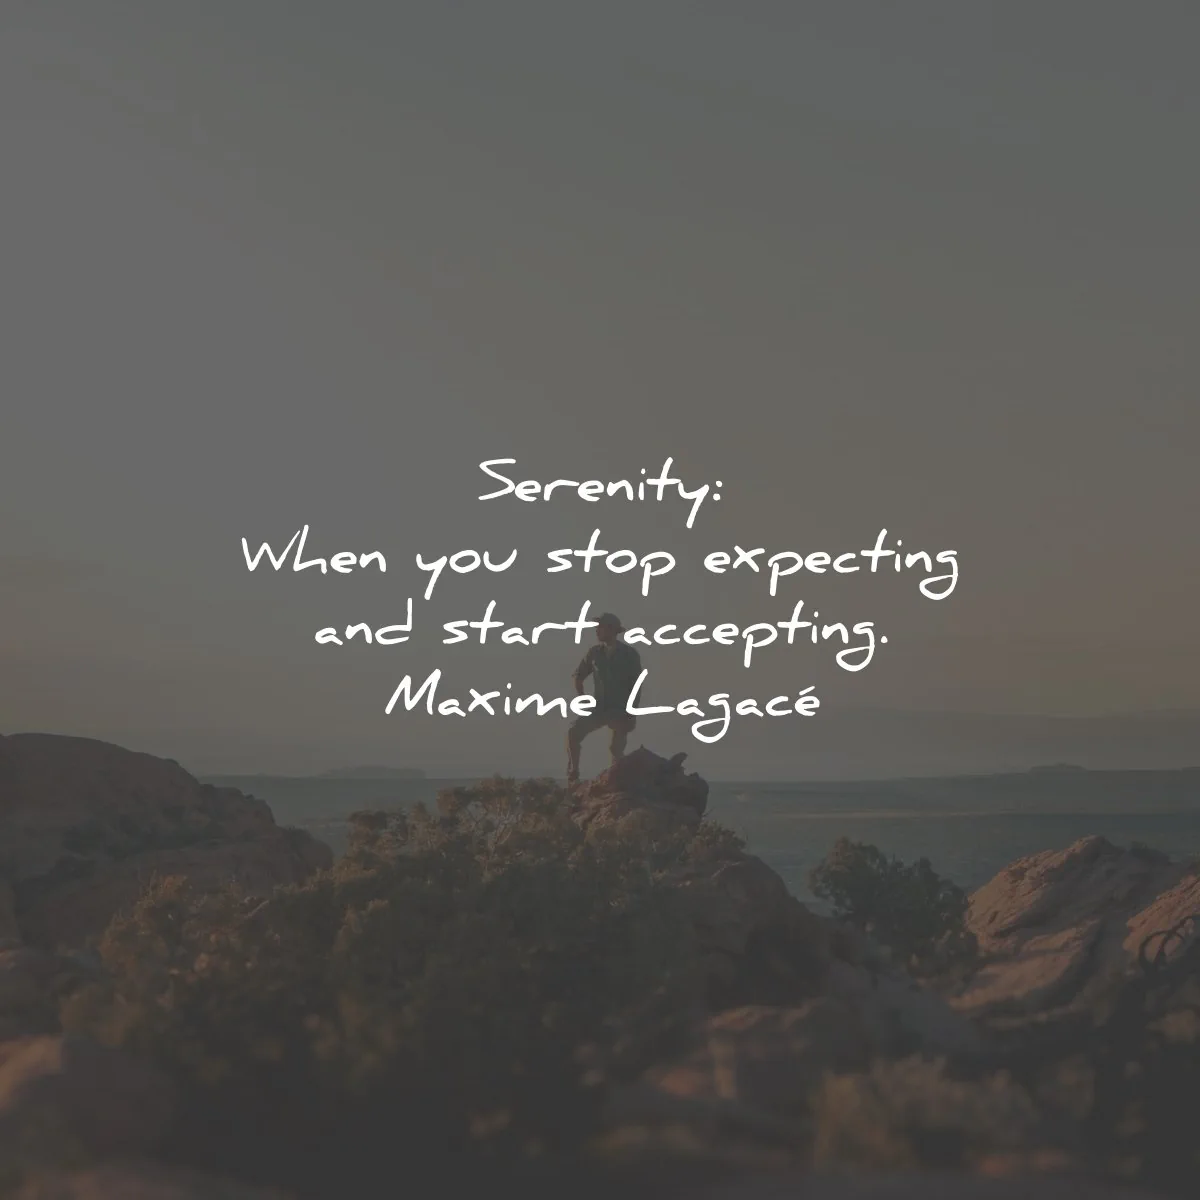 serenity quotes stop expecting accepting maxime lagace wisdom